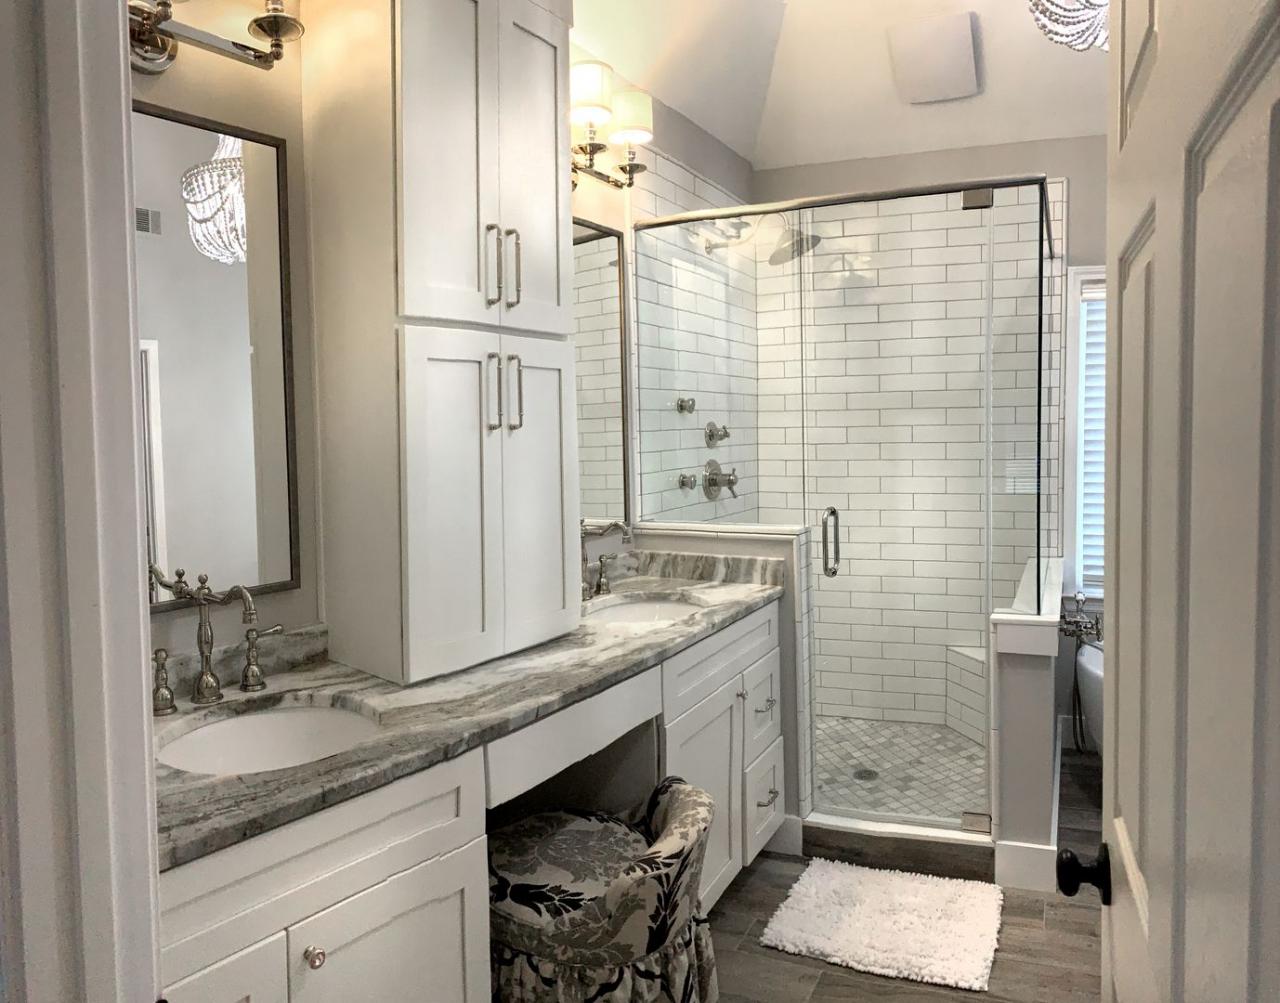 Home page for Victor Smith Remodeling, specializing in master bathrooms